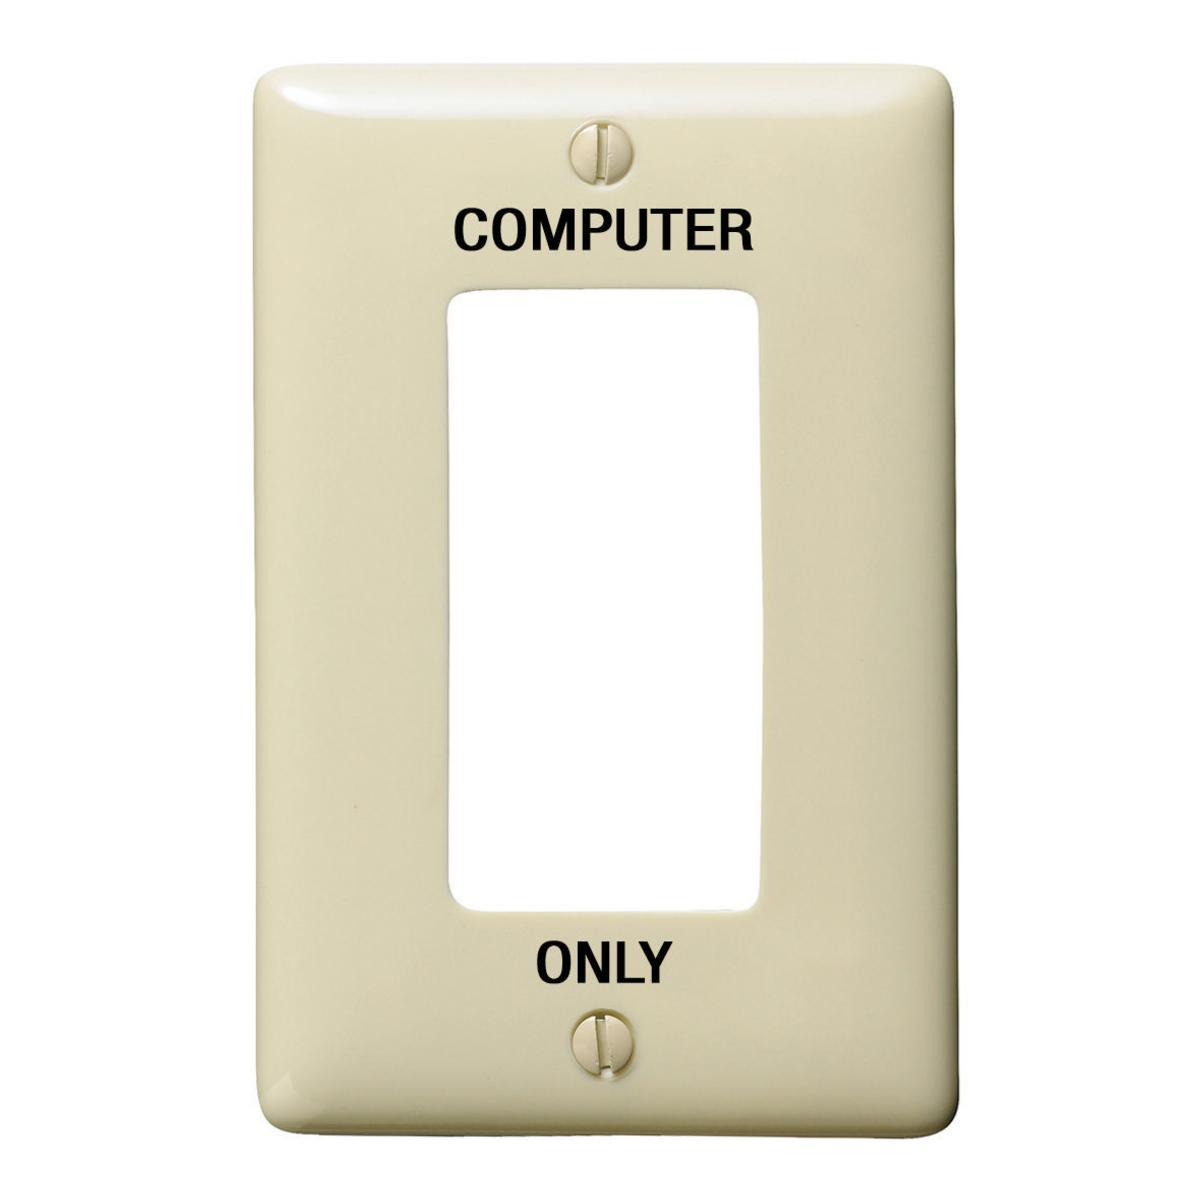 Hubbell NPJ26C Wallplates, Nylon, Mid-Sized, 1-Gang, 1) Rectangular, Ivory, Marked "Computer"  ; Reinforcement ribs for extra strength ; High-impact, self-extinguishing nylon material ; Captive screw feature holds mounting screw in place ; Standard Size is 1/8" larger t